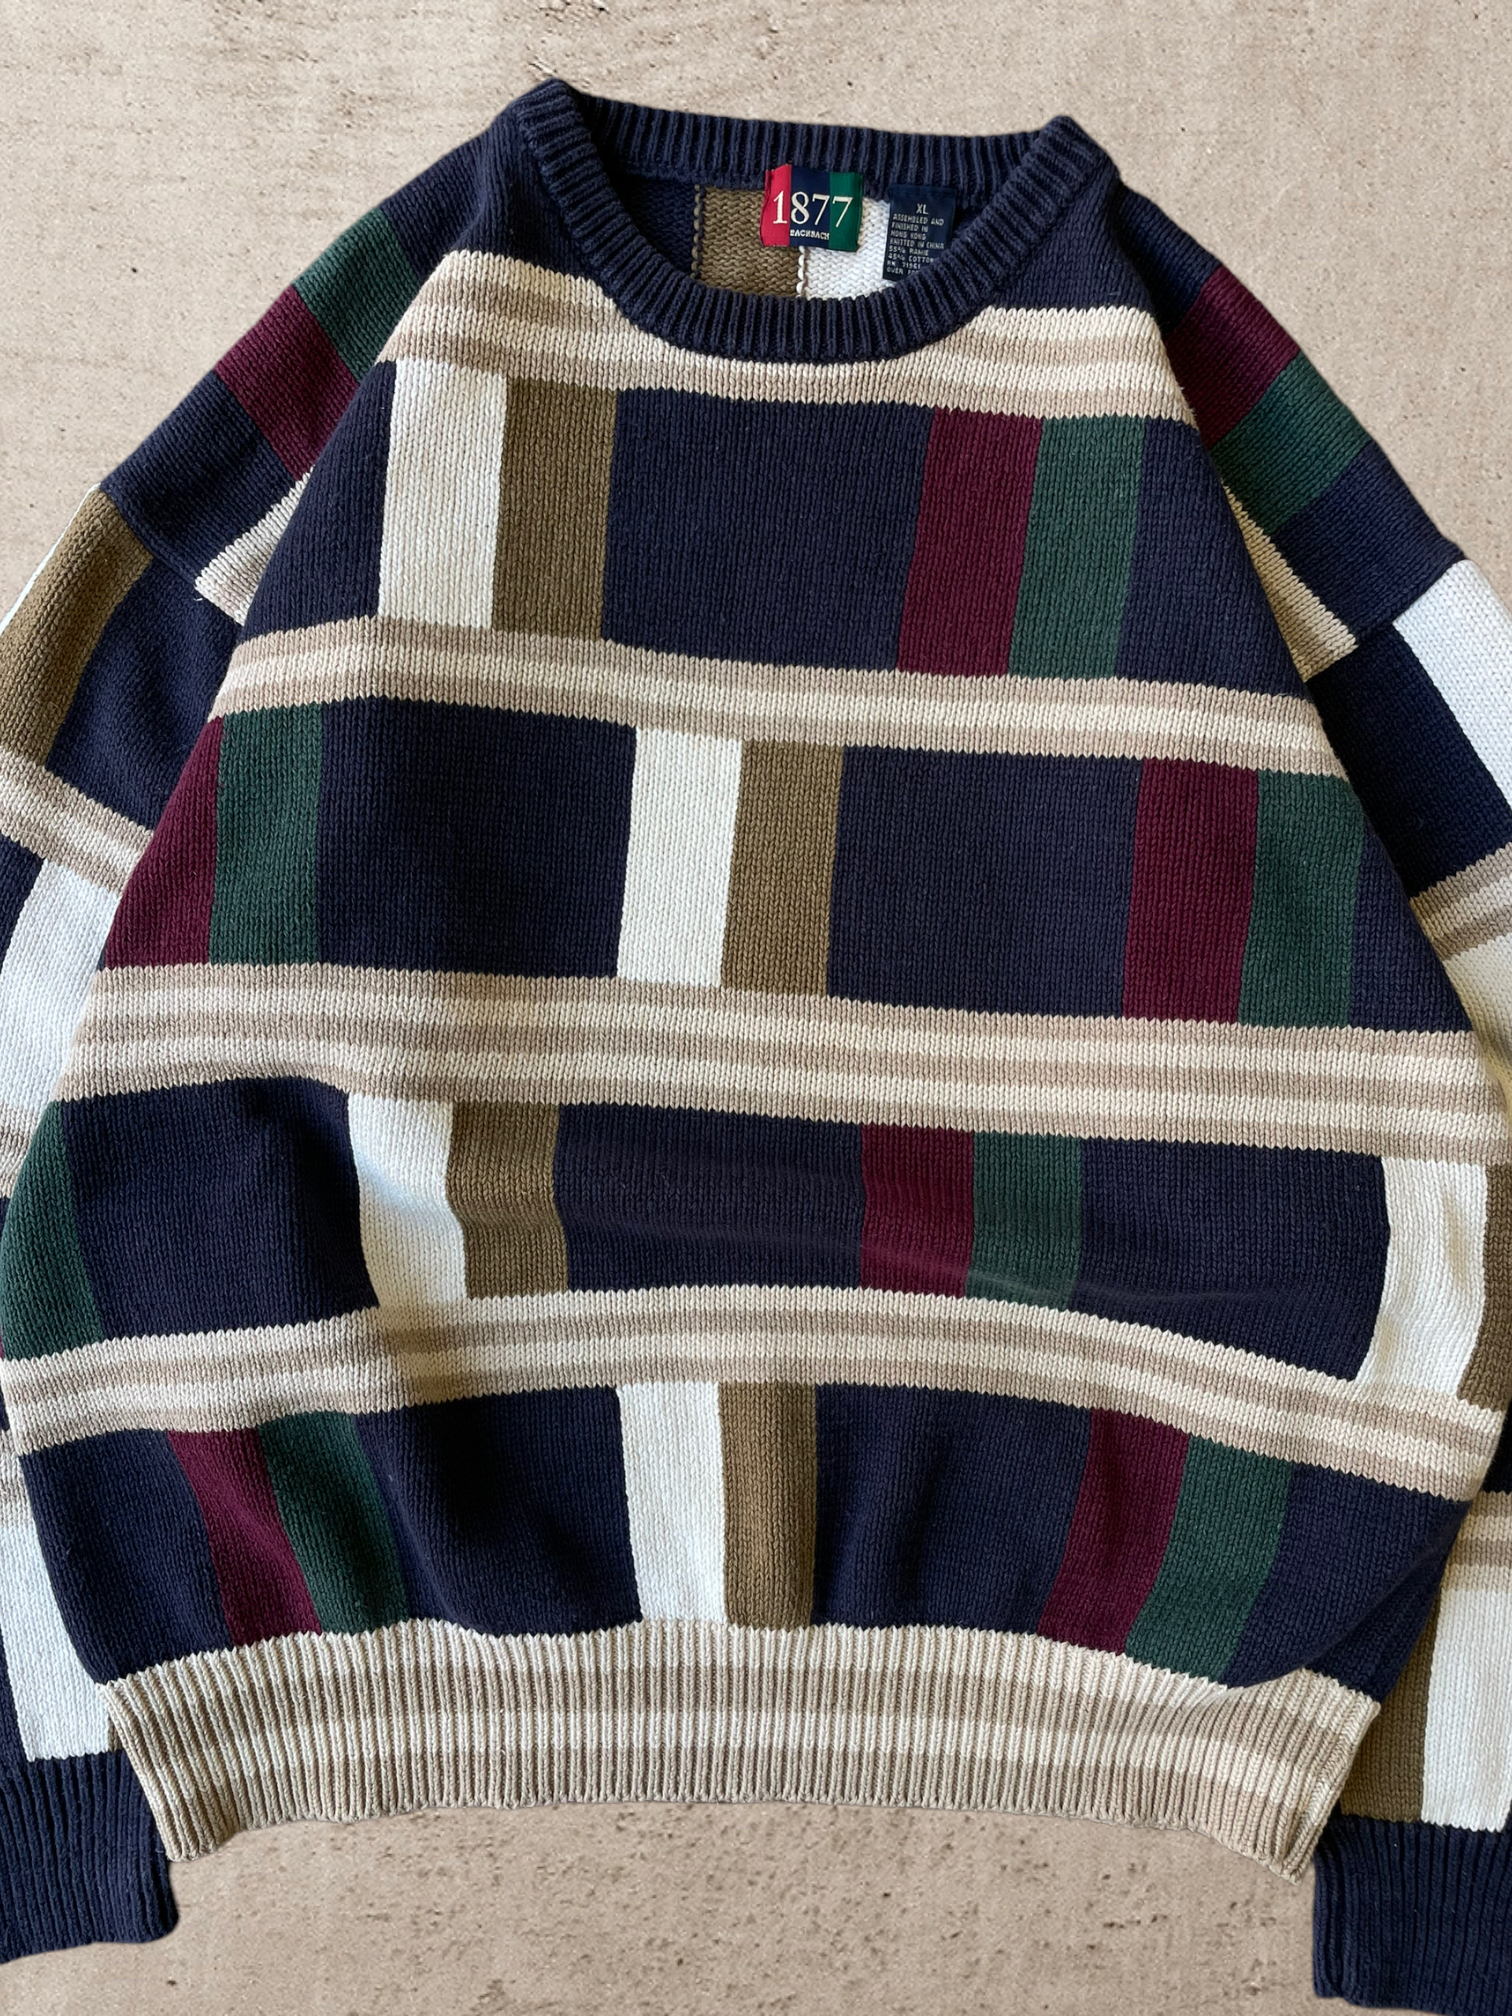 90s Mulitcolor Knit Sweater - XL